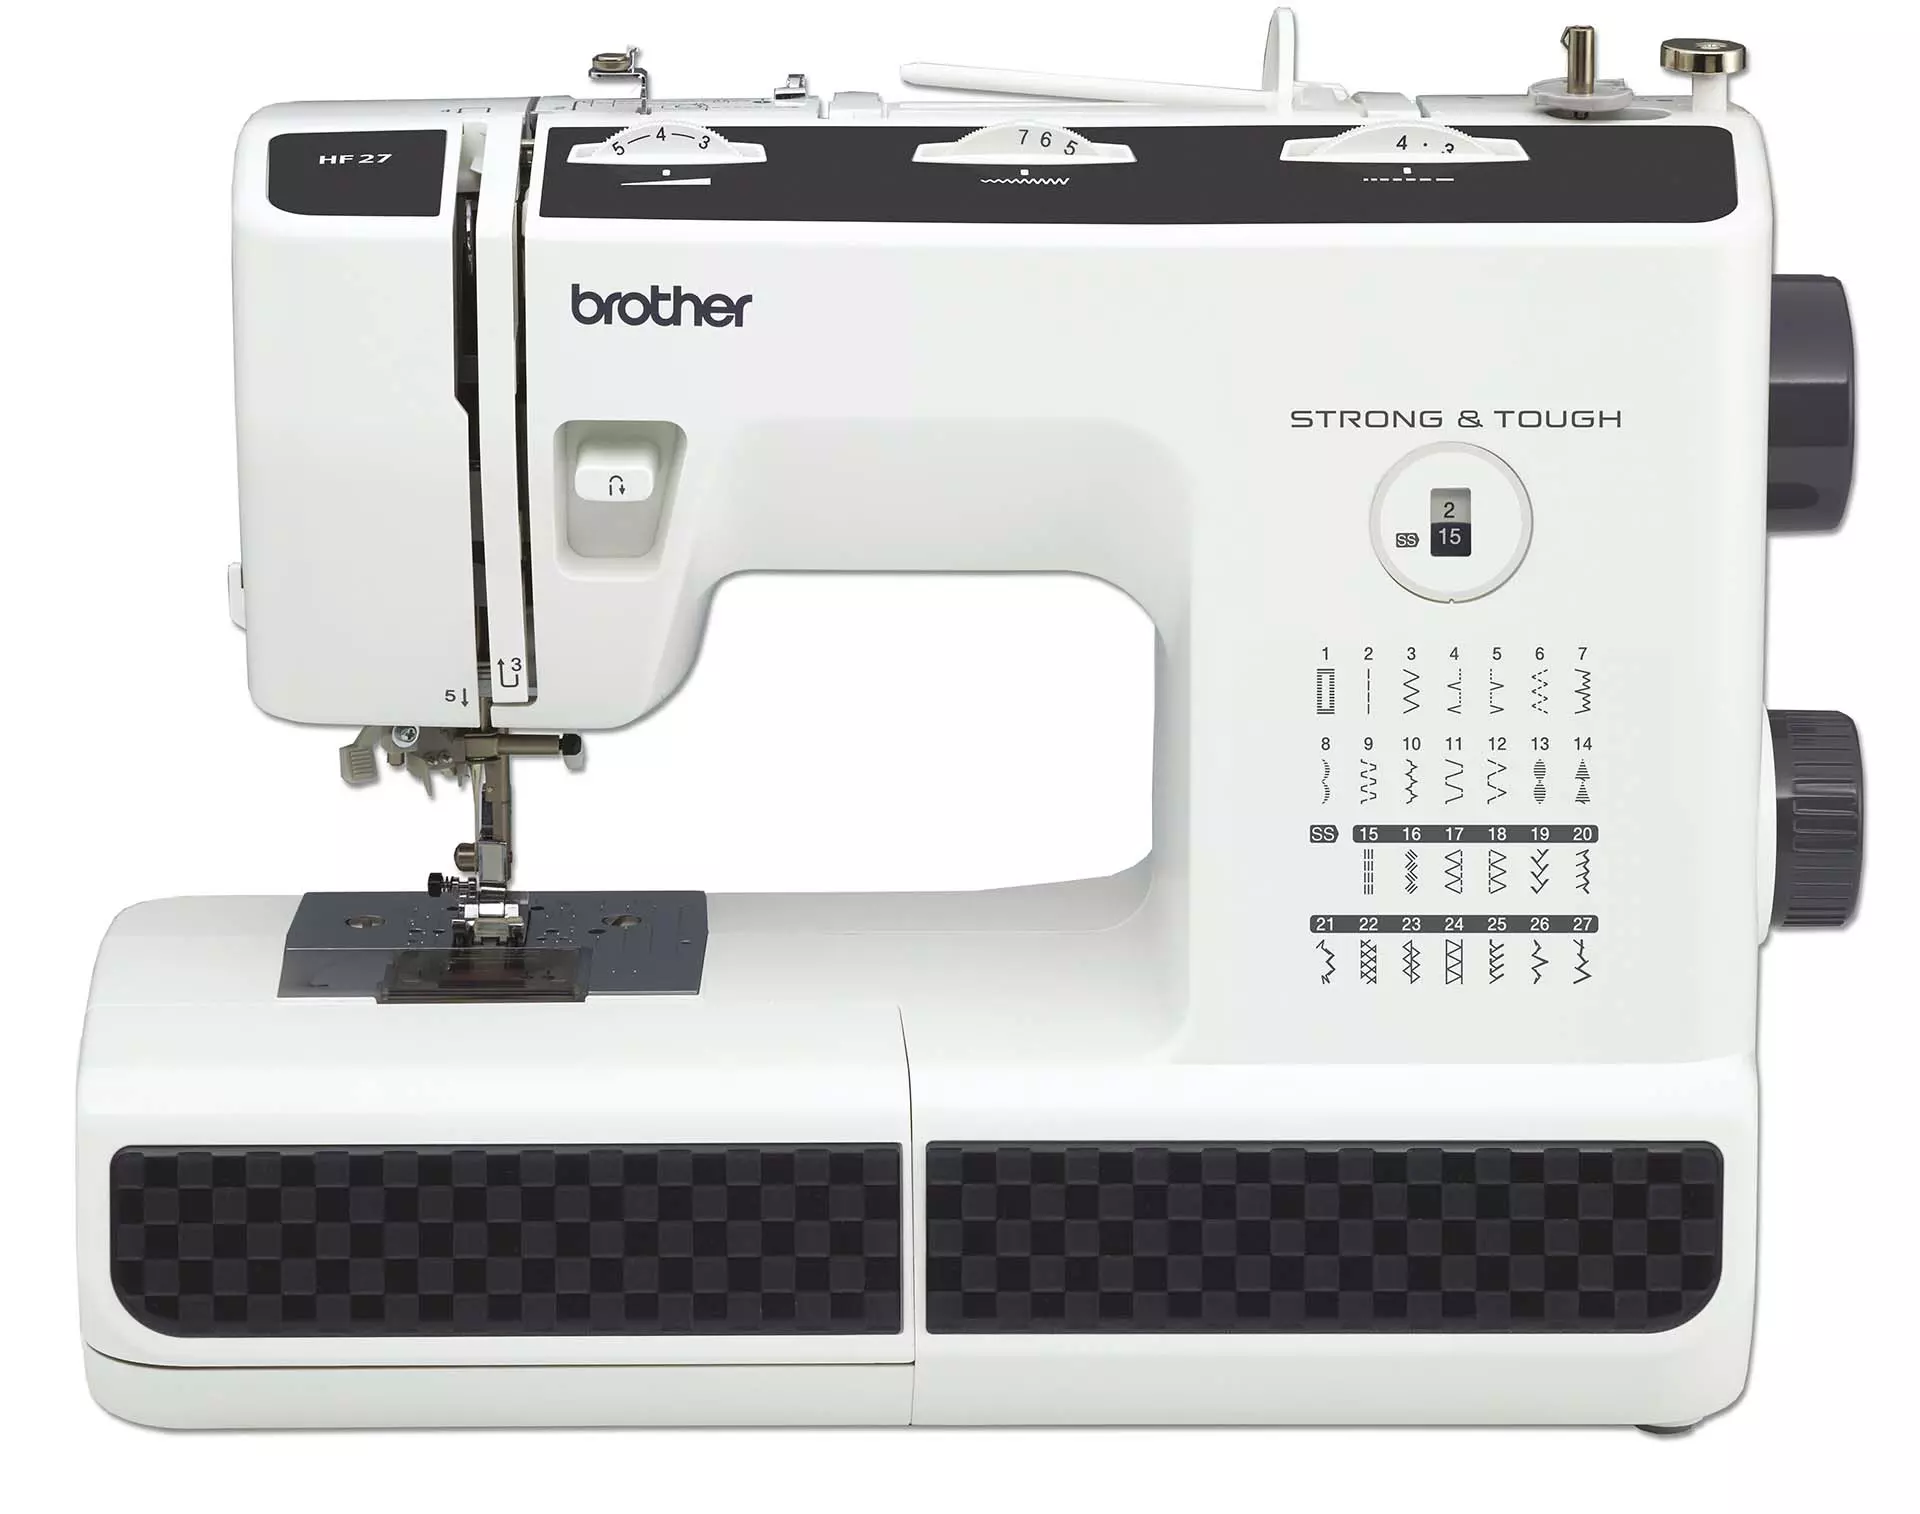 Brother Hf27 Sewing Machine